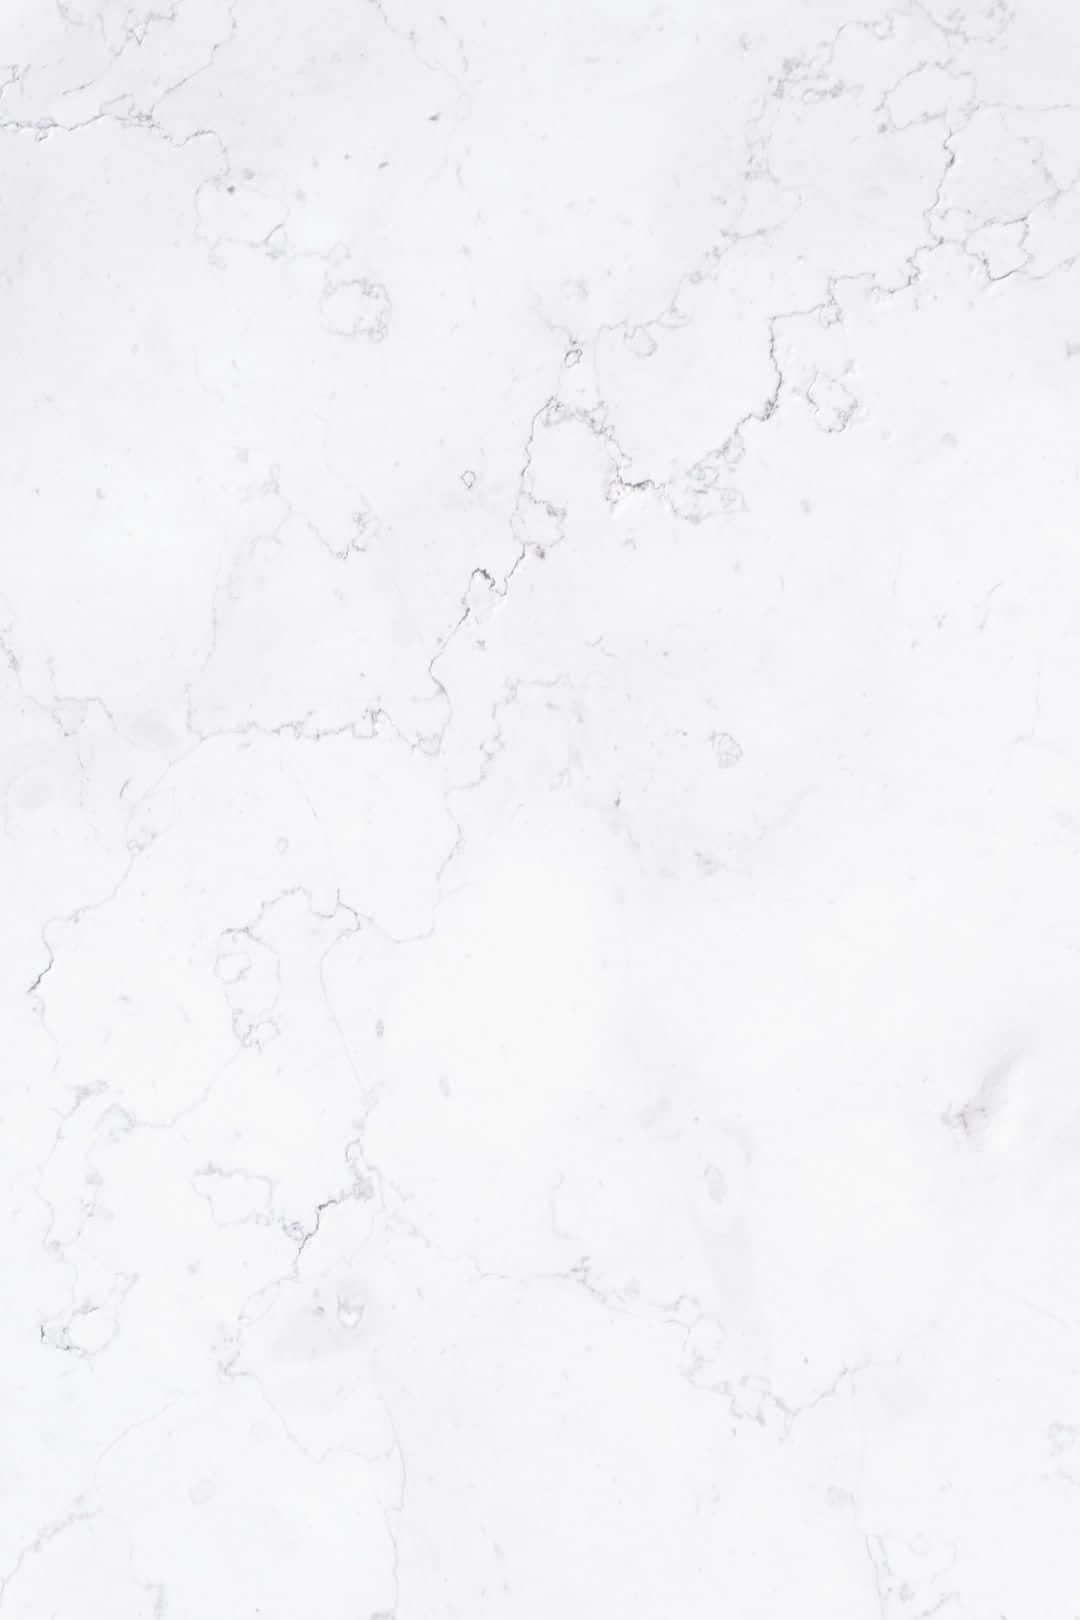 High Resolution Marble Background